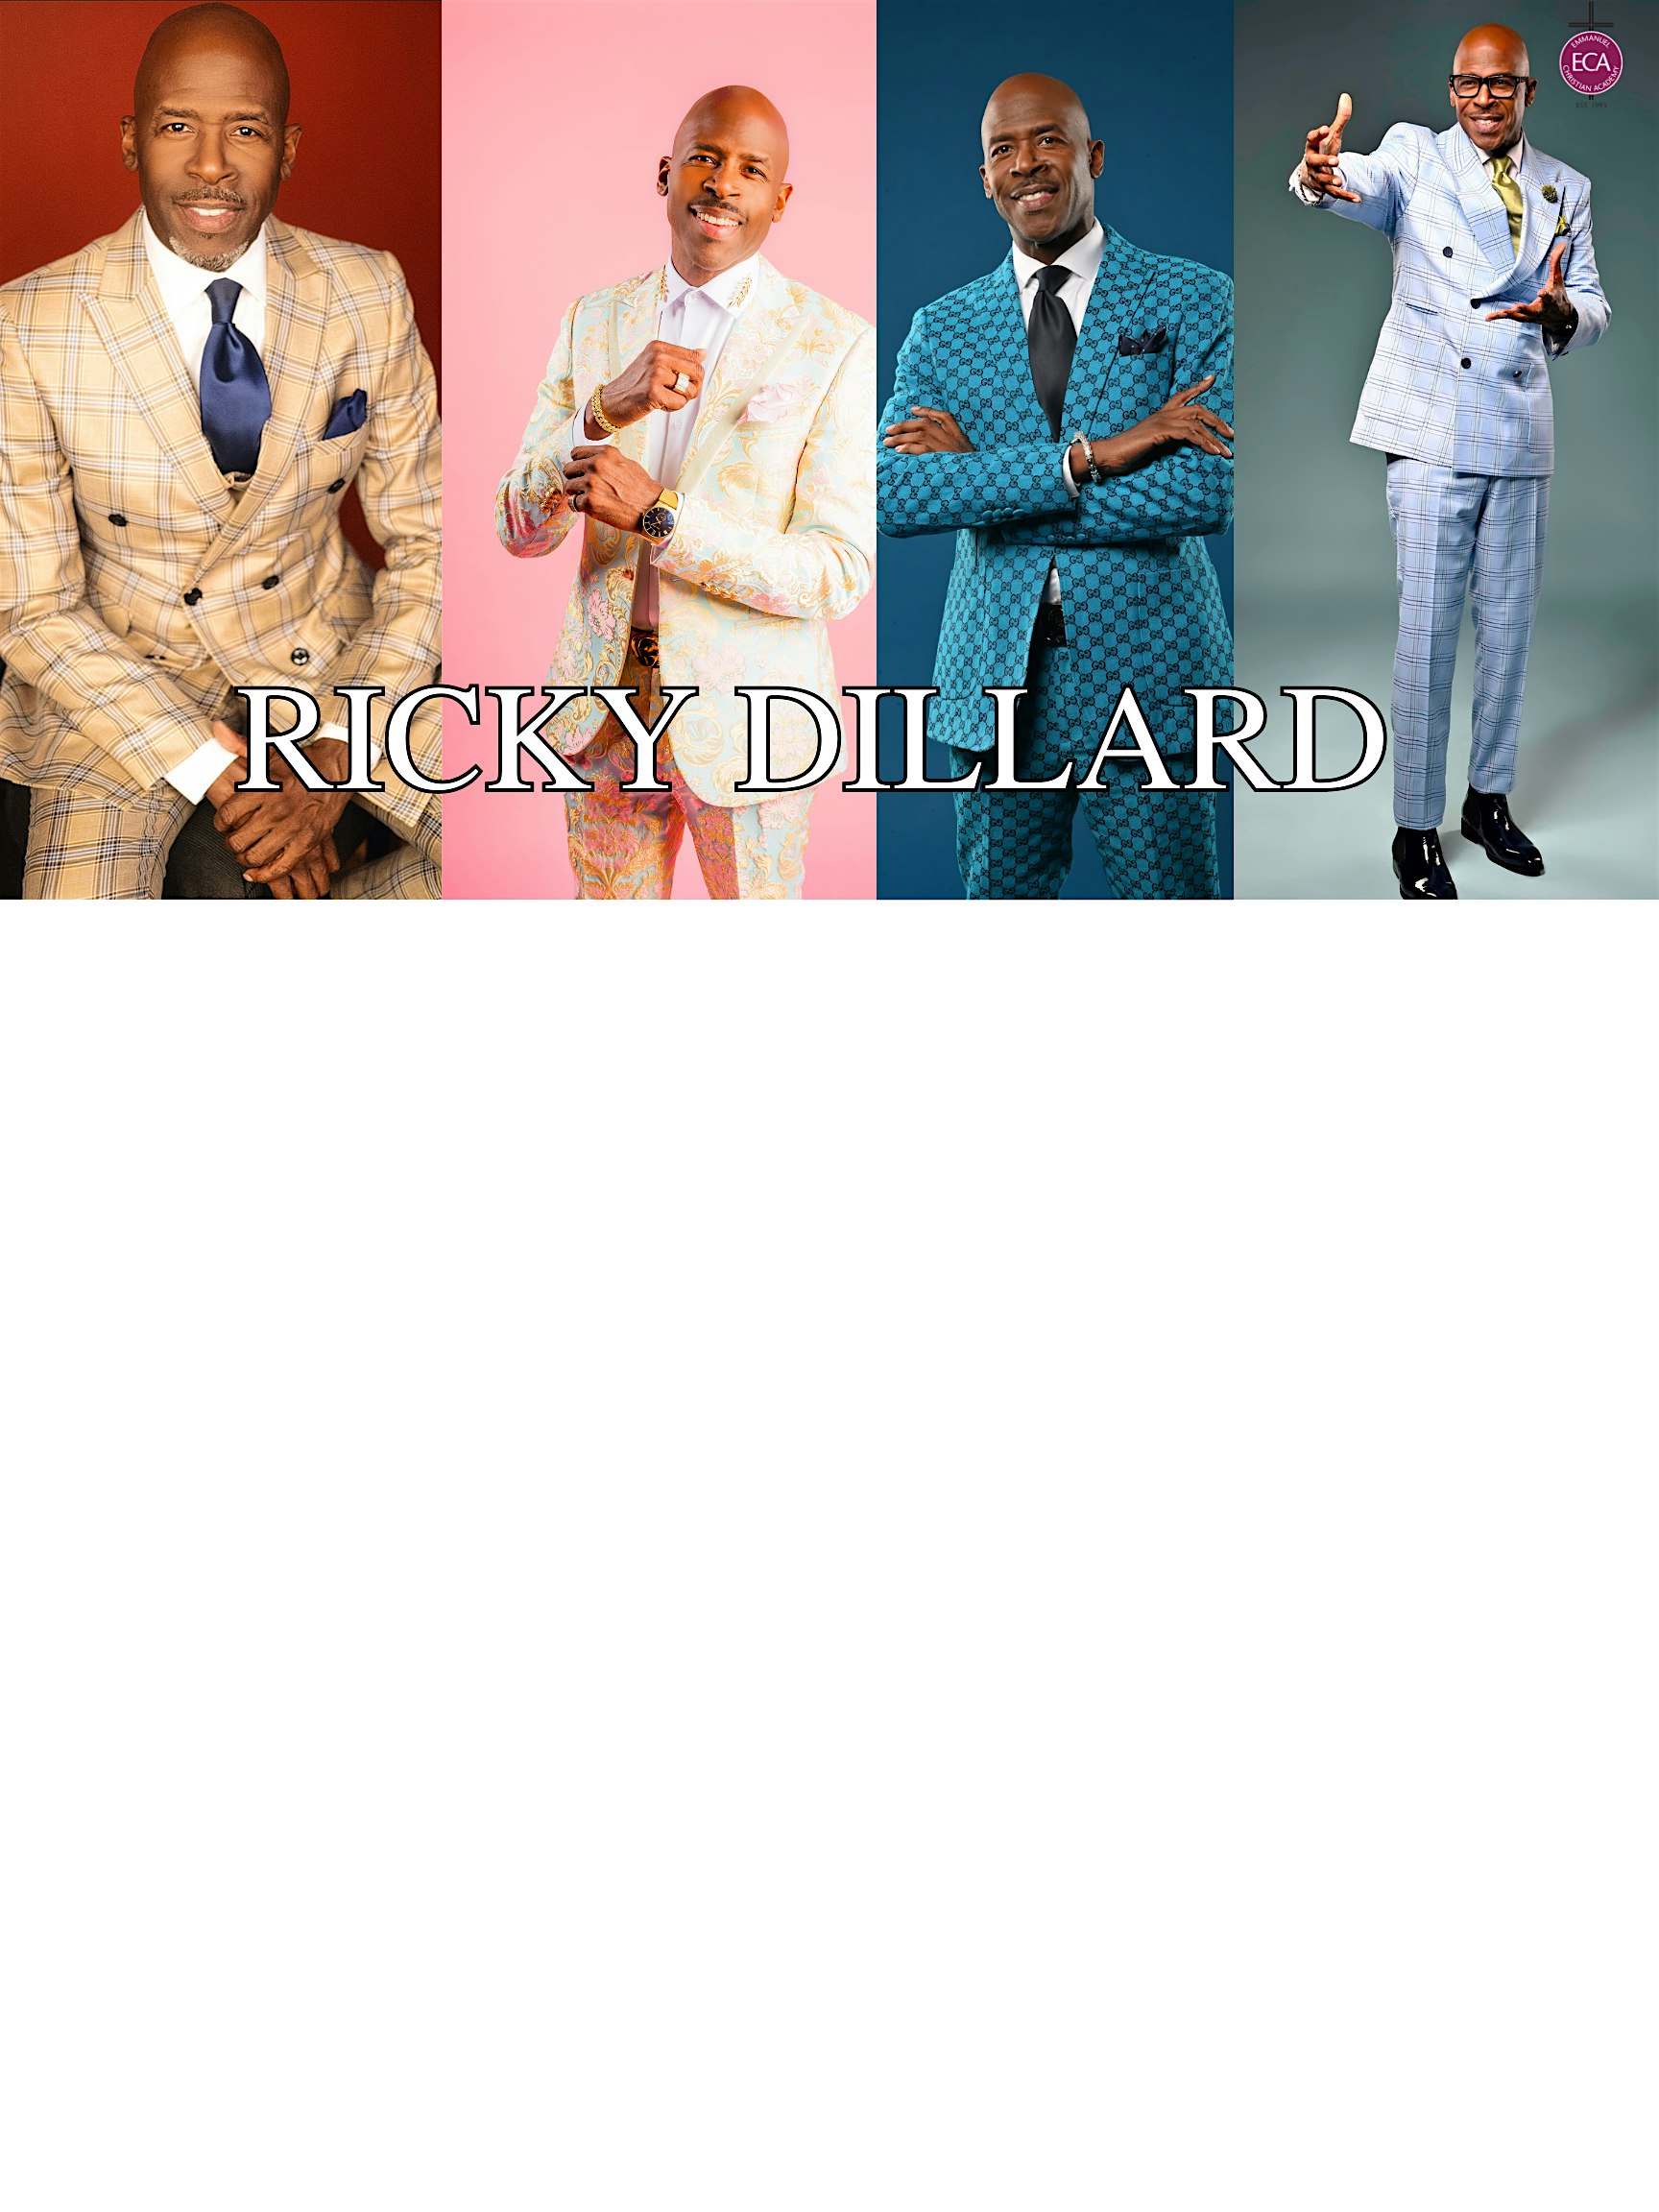 Annual Benefit Concert Featuring Ricky Dillard